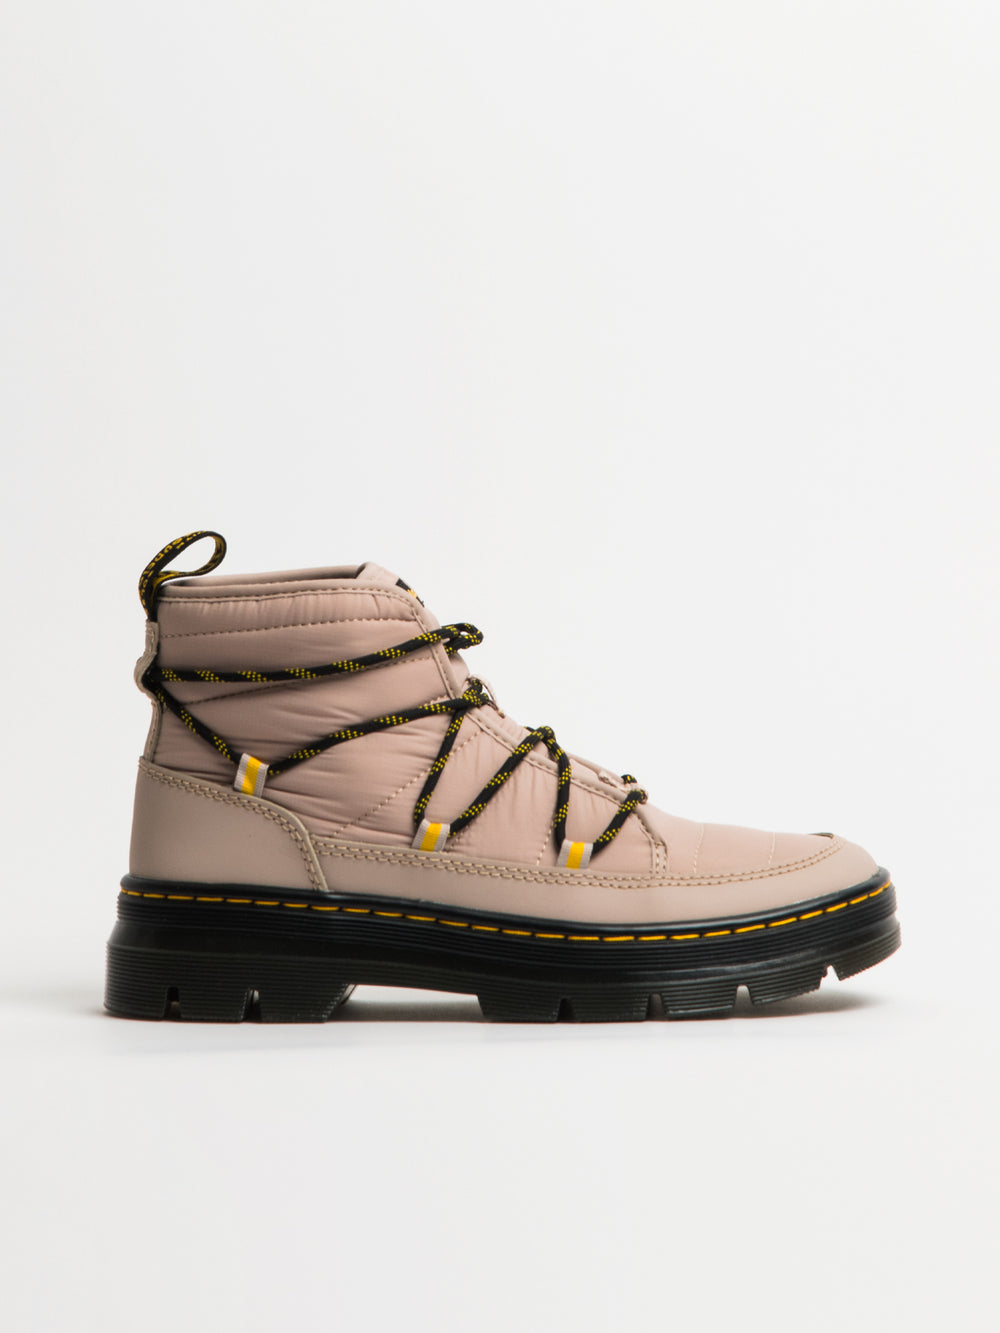 WOMENS DR MARTENS COMBS PADDED QUILTED WARM